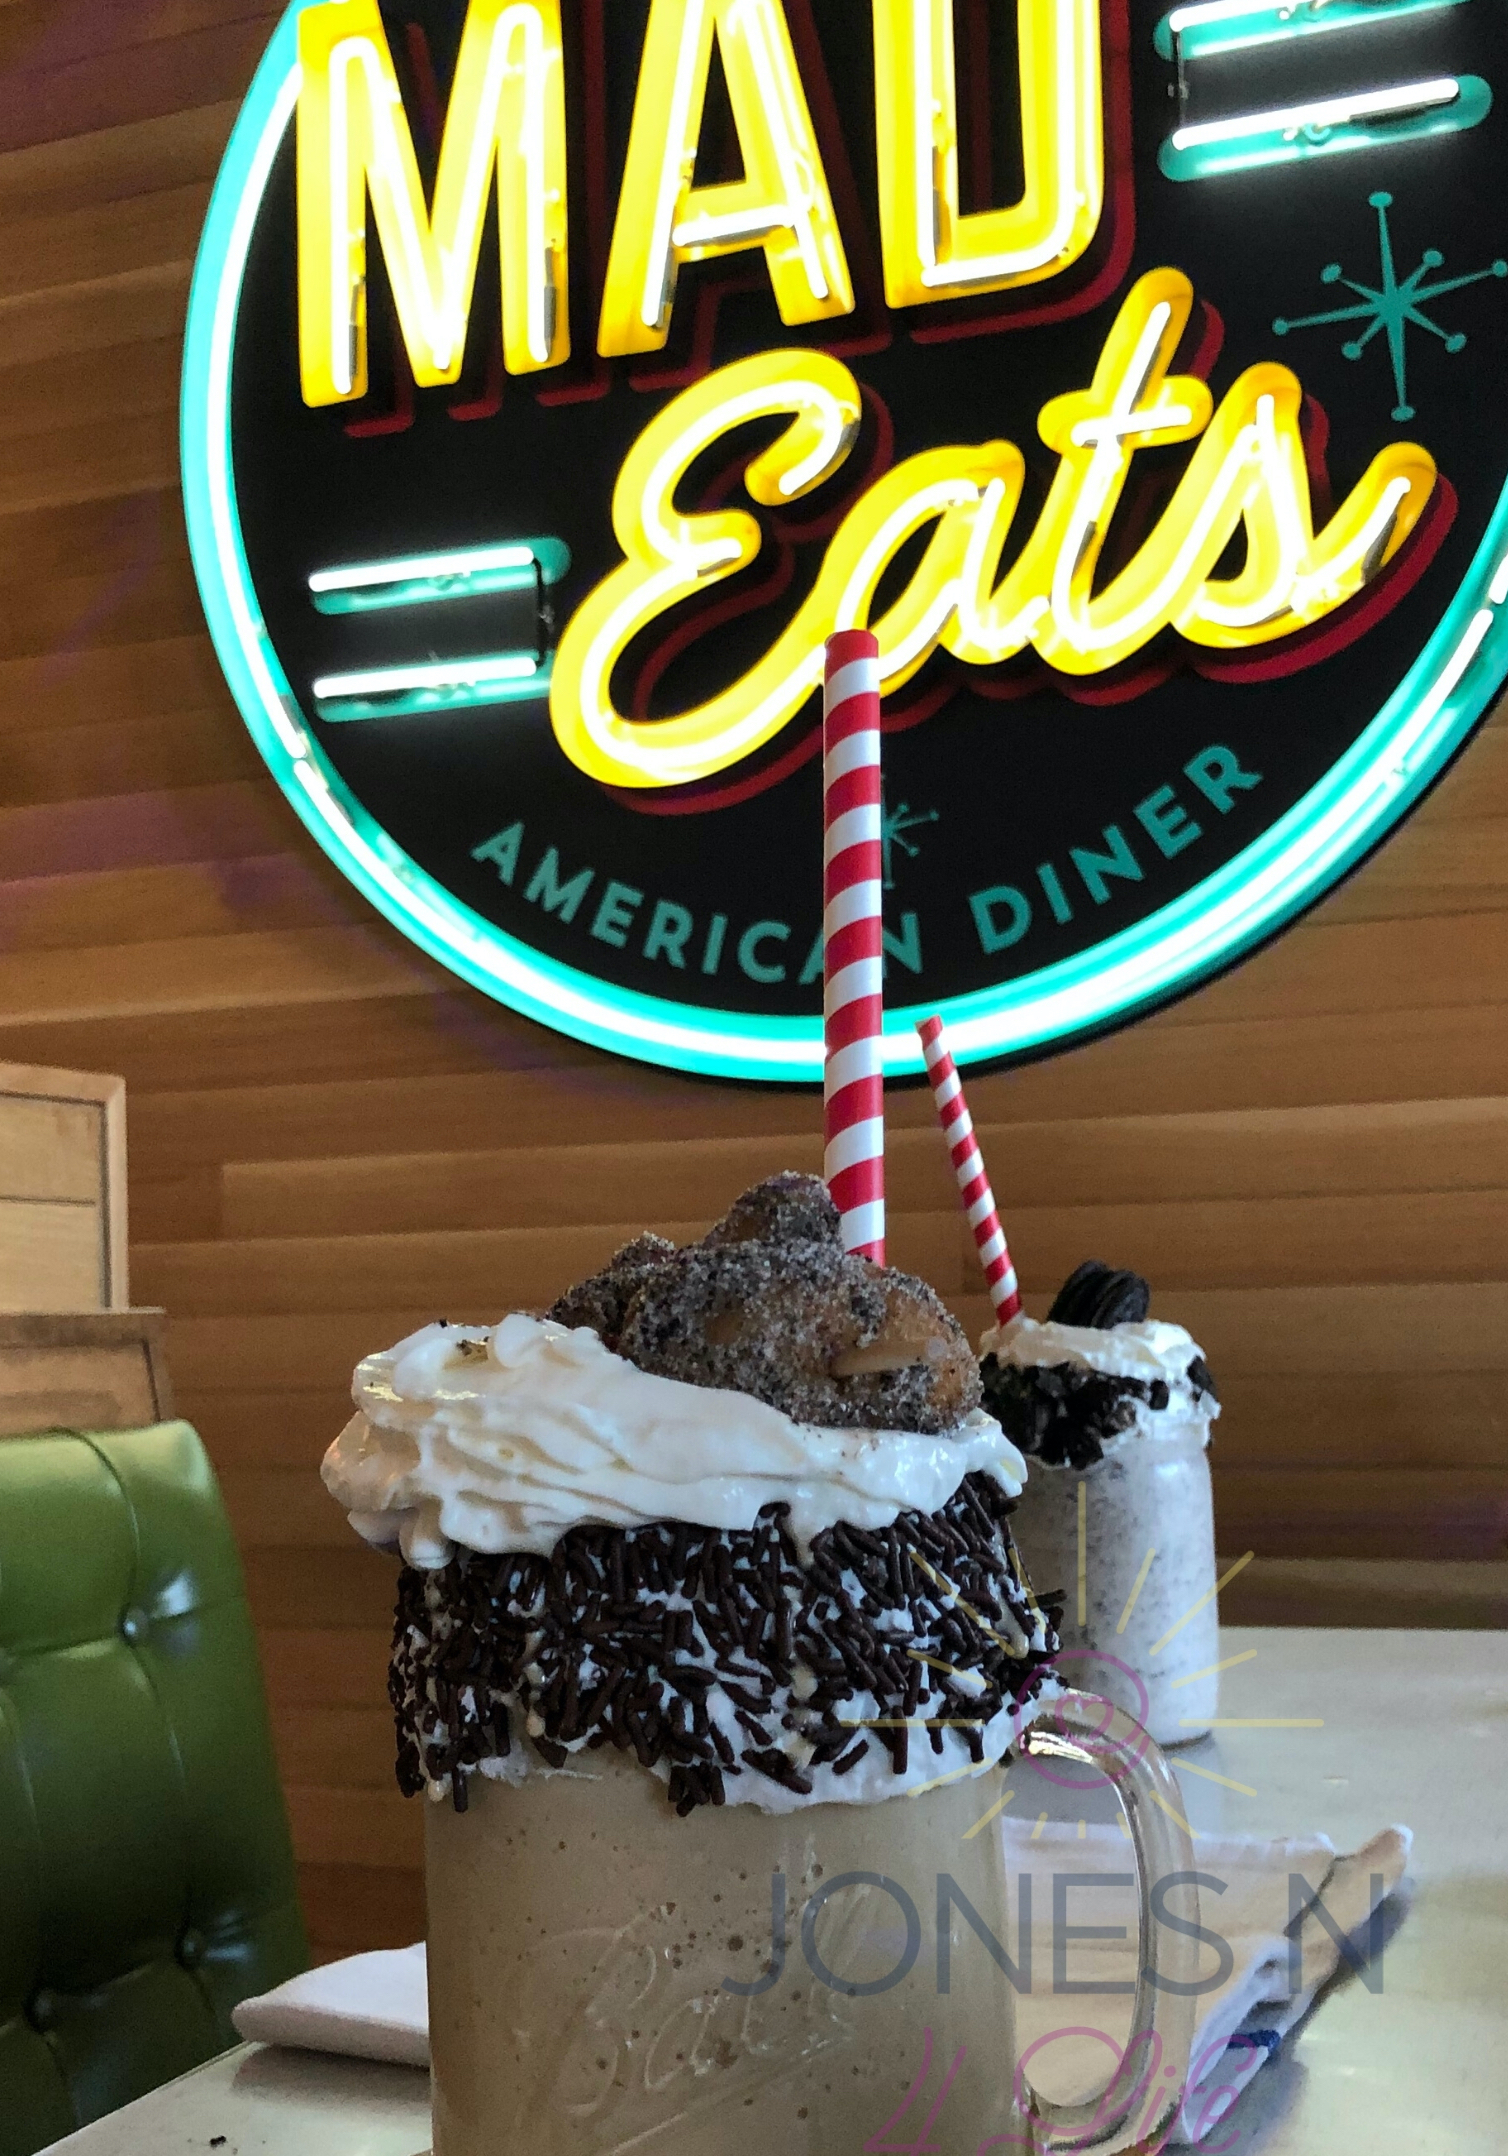 Two chocolate malts sit on a table in restaurant in front of the Mad Eats restaurant sign hanging on the wall in background.